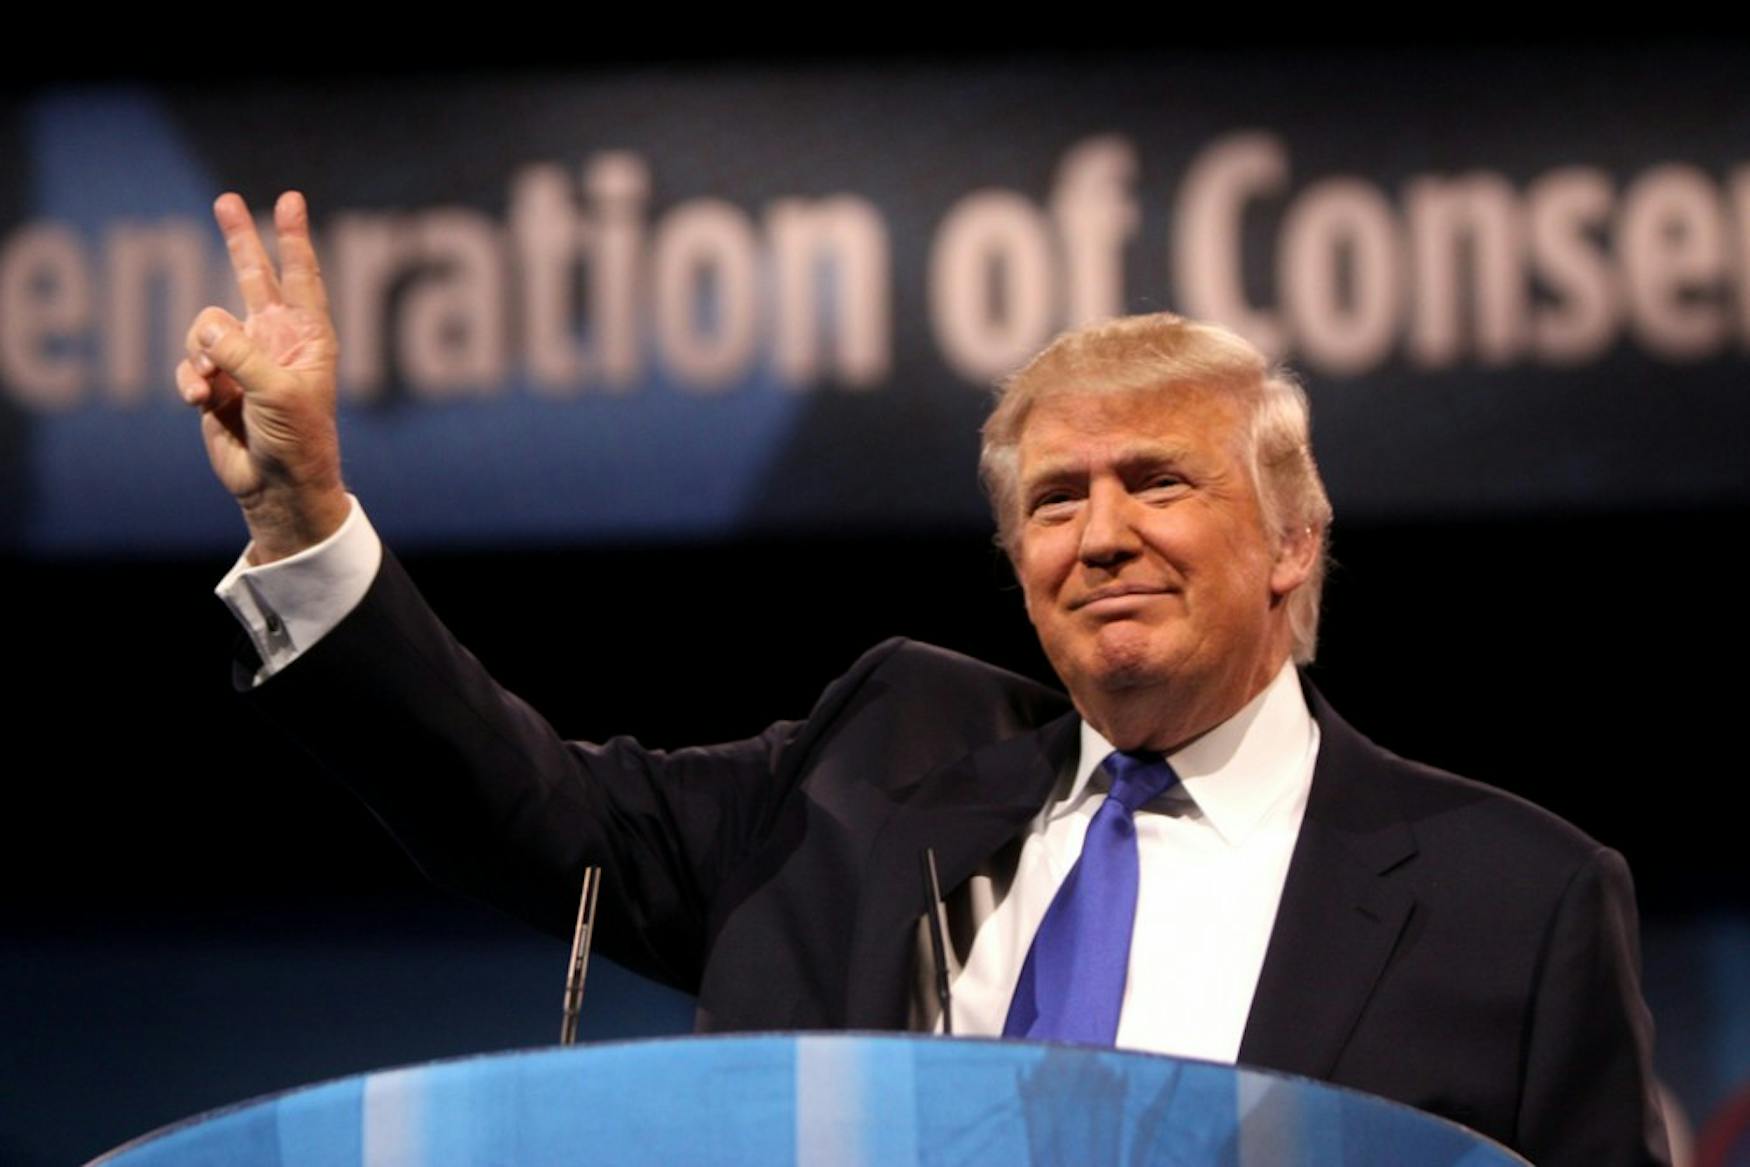 TRUMP THIS: Donald Trump (above) recently announced that he is considering running for president. Above, he is pictured speaking at the 2013 Conservative Political Action Conference in National Harbor, Maryland.